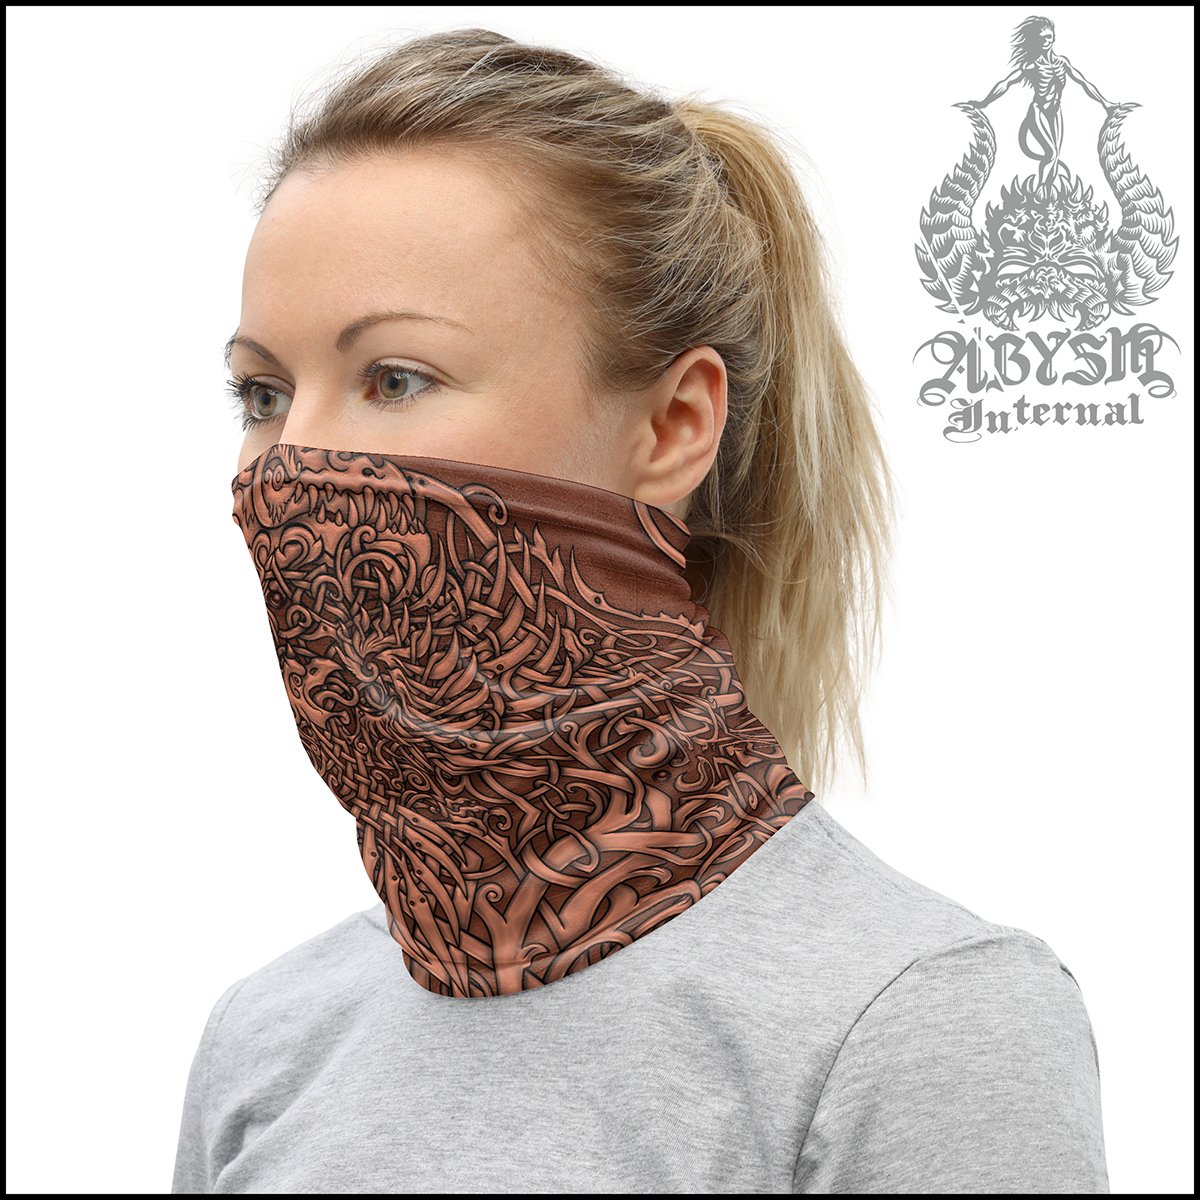 Yggdrasil Neck Gaiter, Face Mask, Printed Head Covering, Viking Tree of Life, Nordic Art - 6 Colors - Abysm Internal